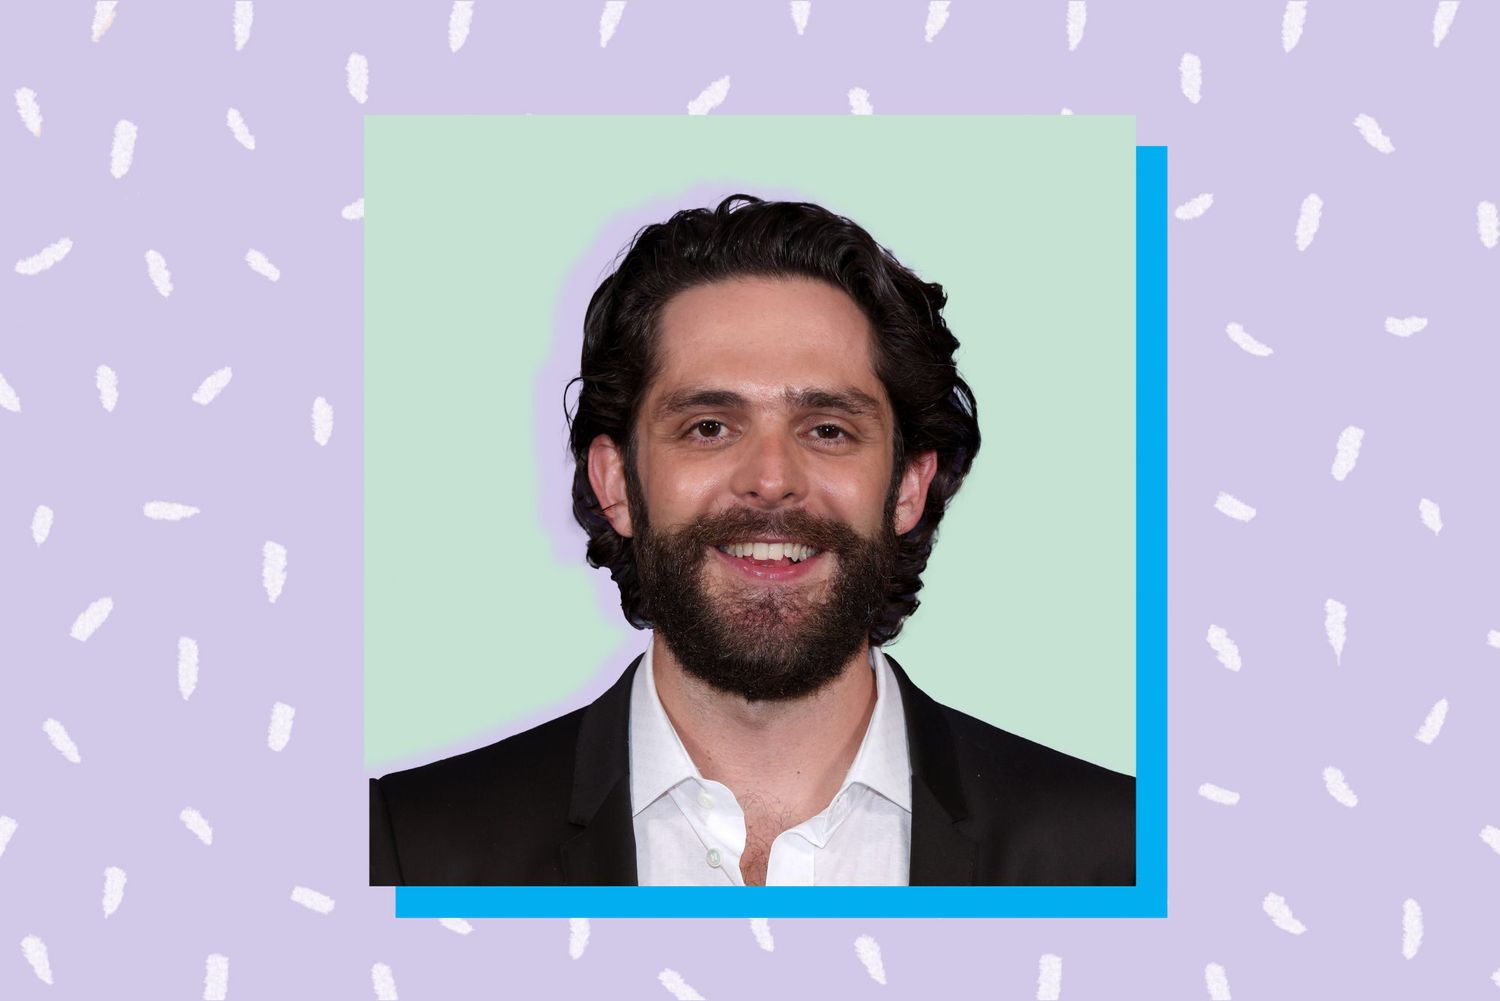 An image of Thomas Rhett on a colorful background.